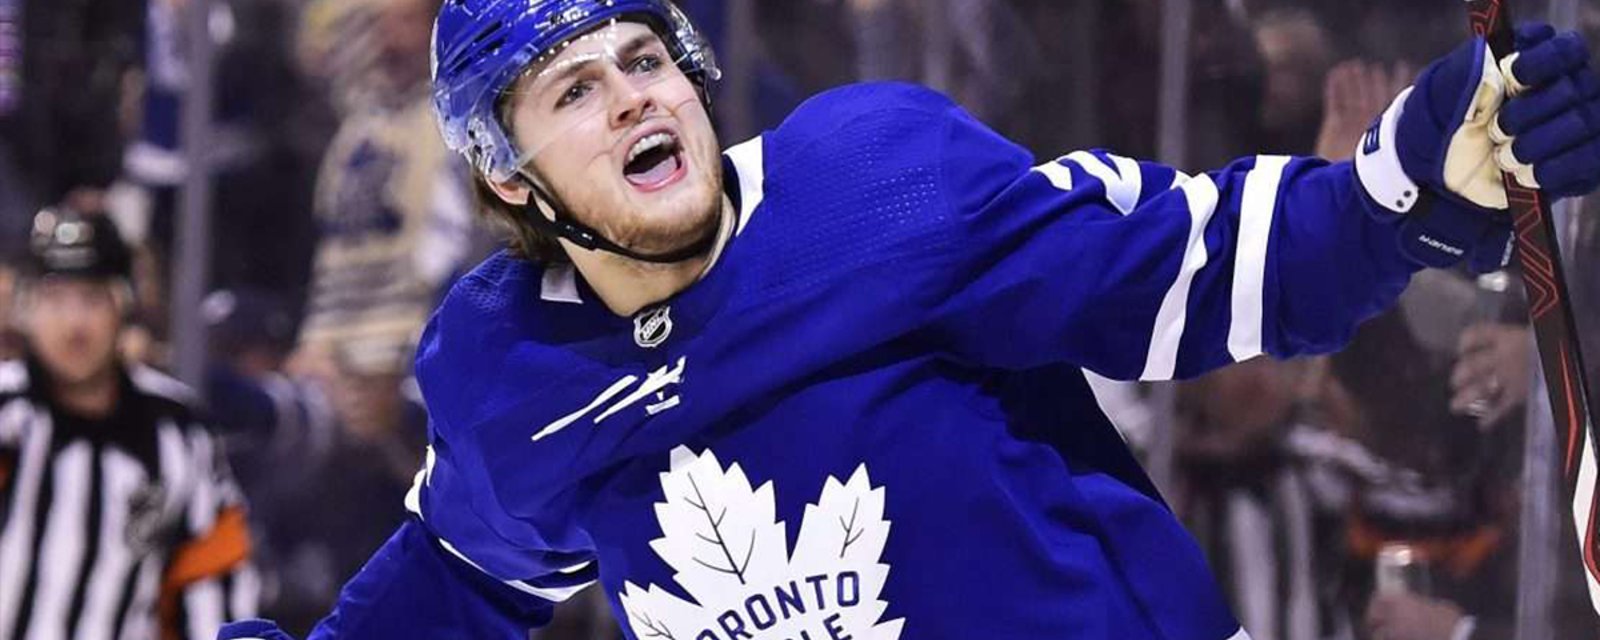 Report: Leafs insider reports the team has signed William Nylander